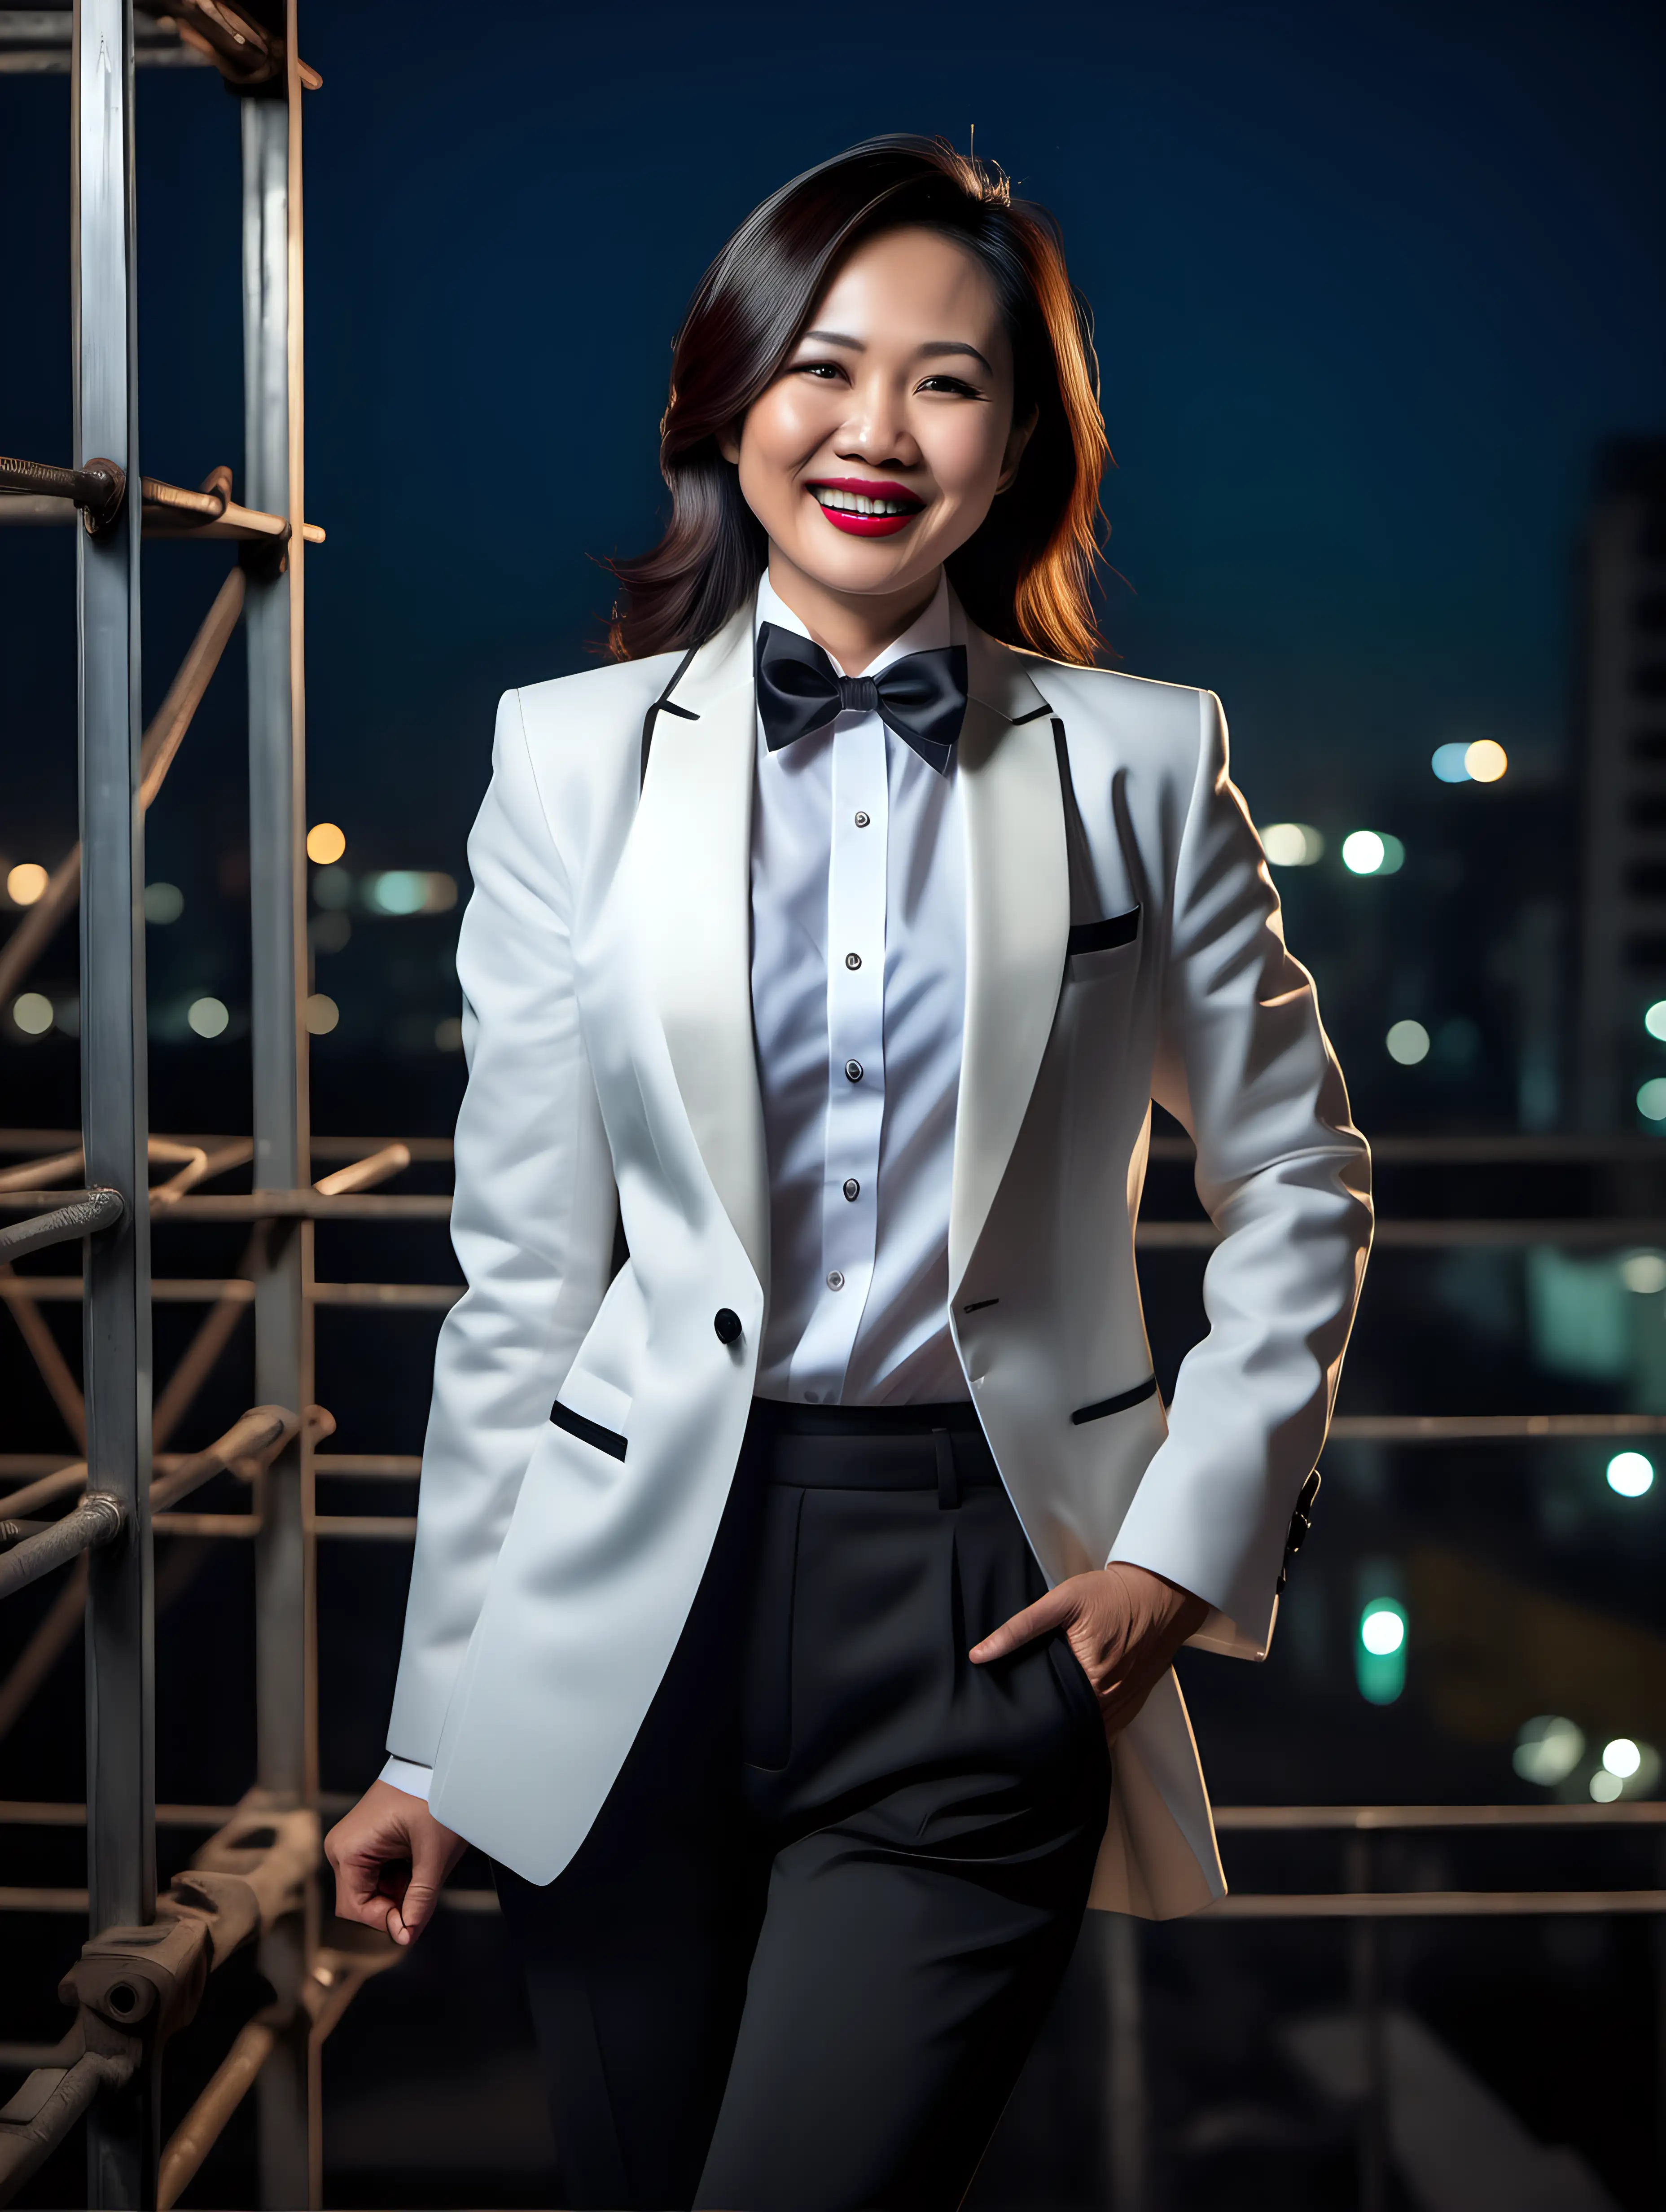 Sophisticated-Vietnamese-Lady-in-White-Tuxedo-Laughing-on-Scaffold-at-Night